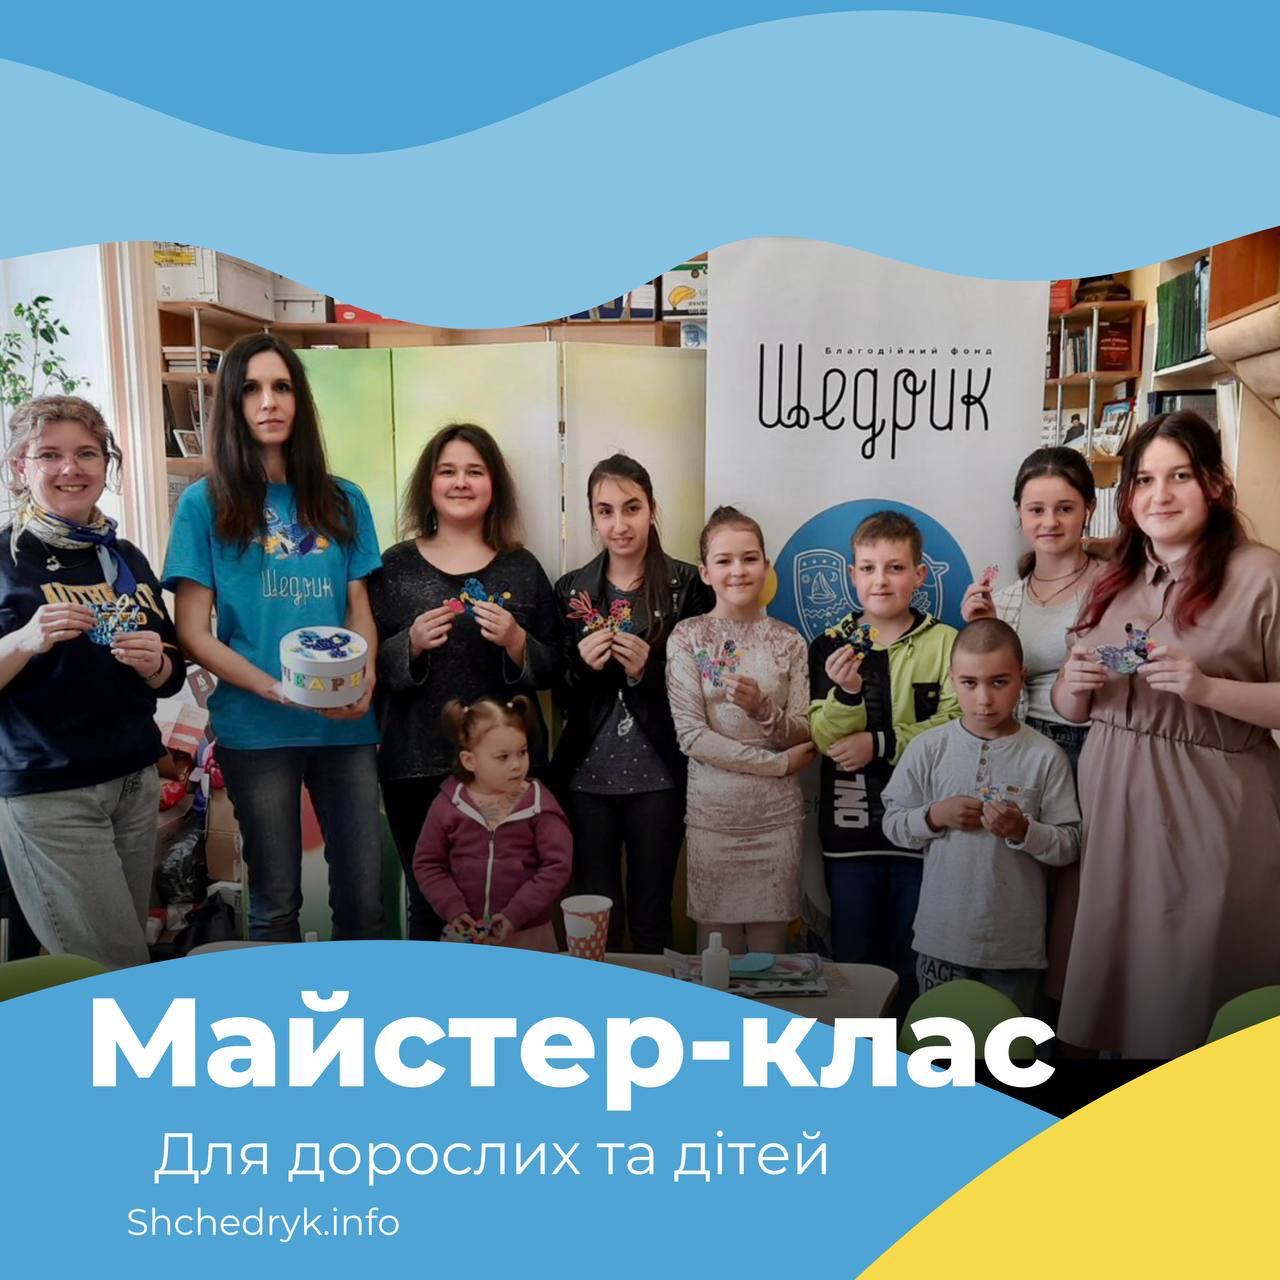 Workshop for Adults and Children